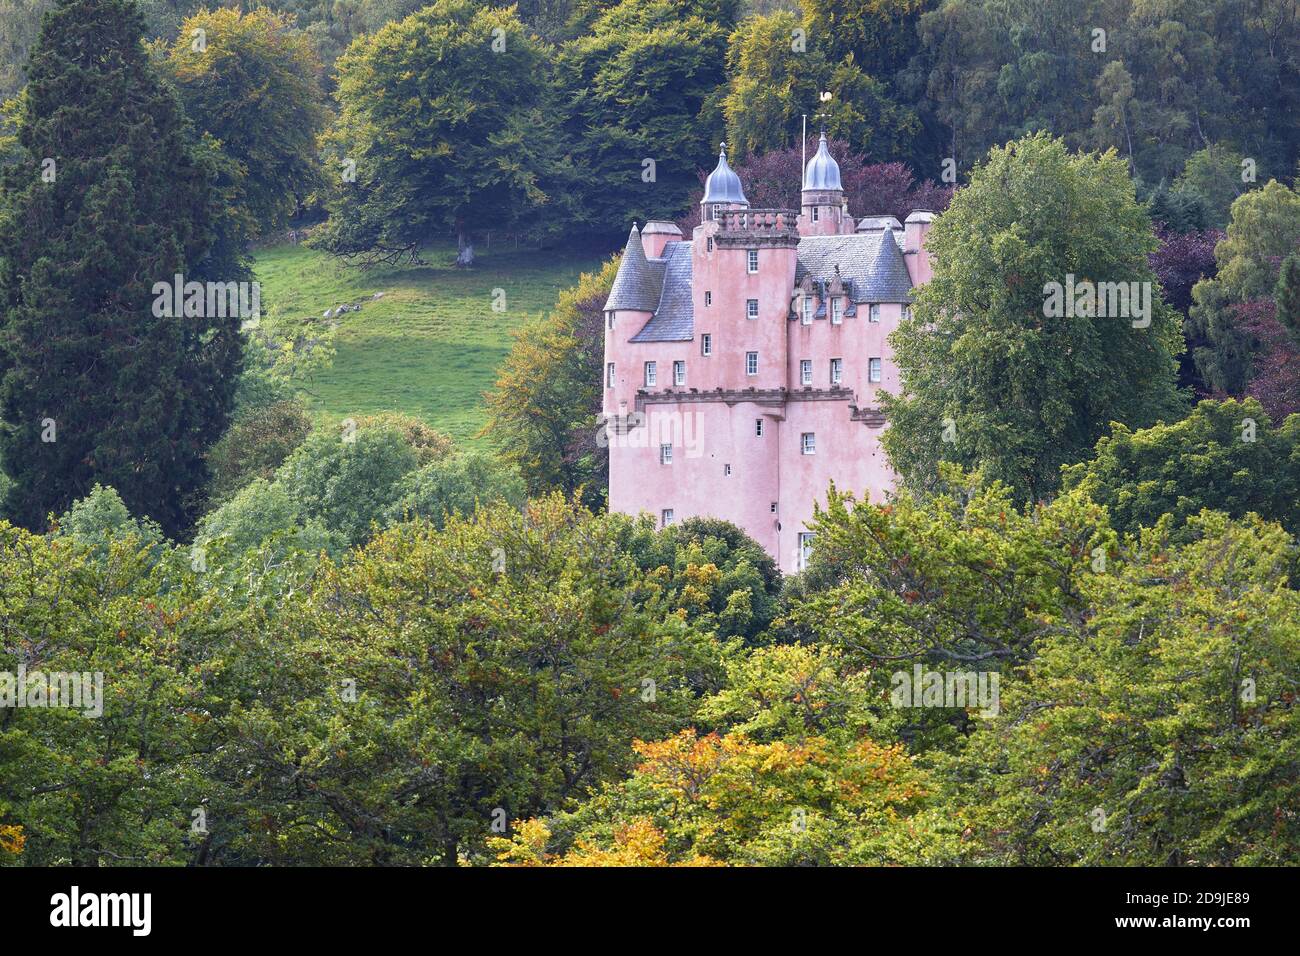 Craigievar Castle, Aberdeenshire, Scotland.  Owned by the National Trust for Scotland. Stock Photo